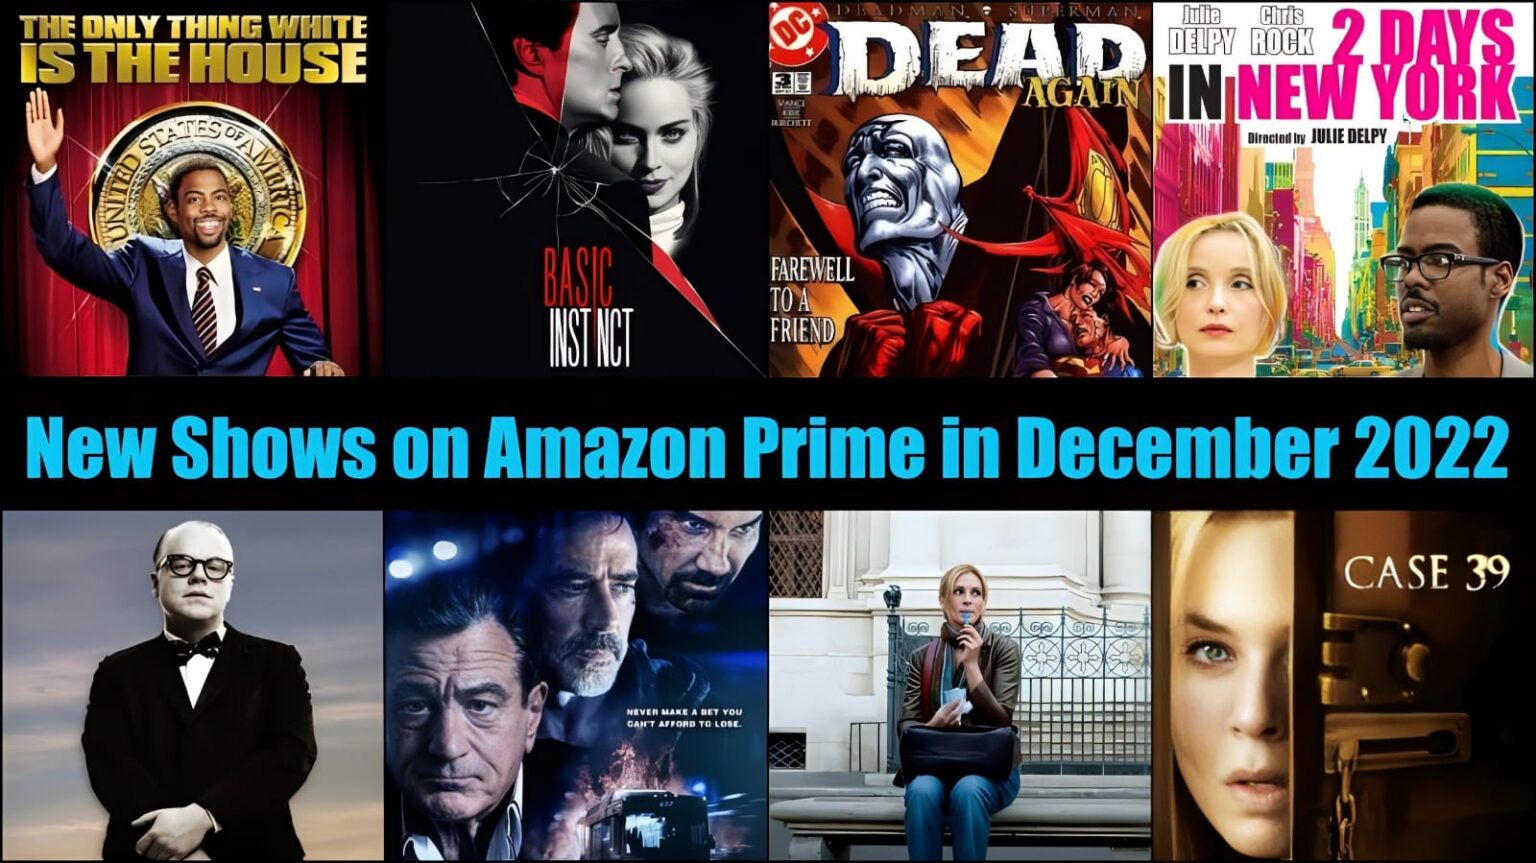 All New Shows on Amazon Prime in December 2022